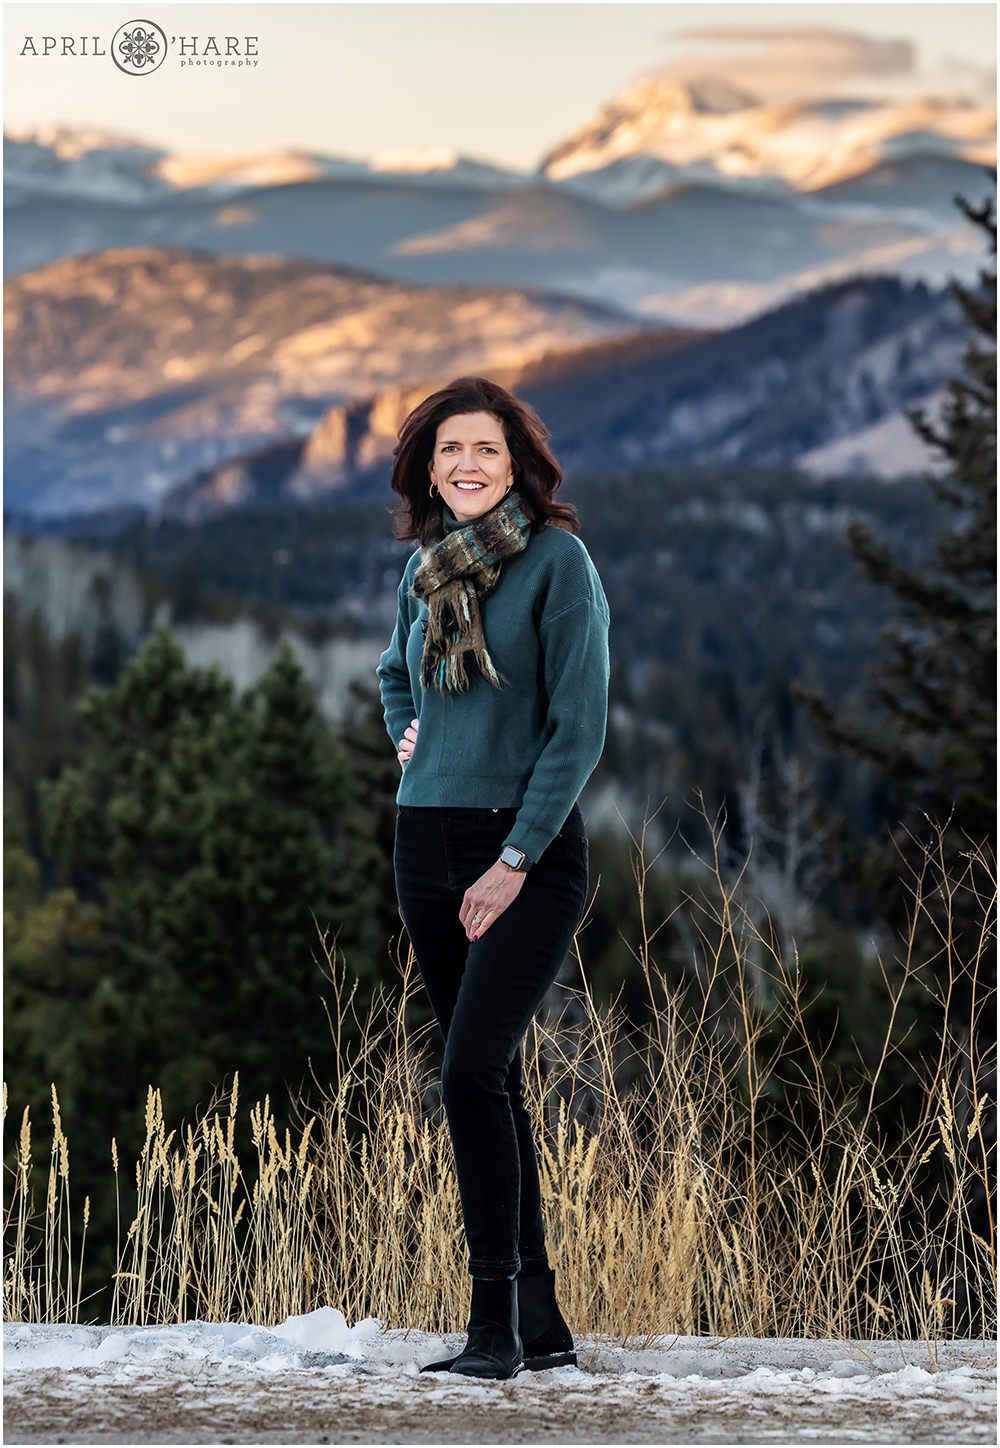 A woman wearing a teal sweater with a scarf poses with a beautiful mountain backdrop behind her during winter in Evergreen Colorado